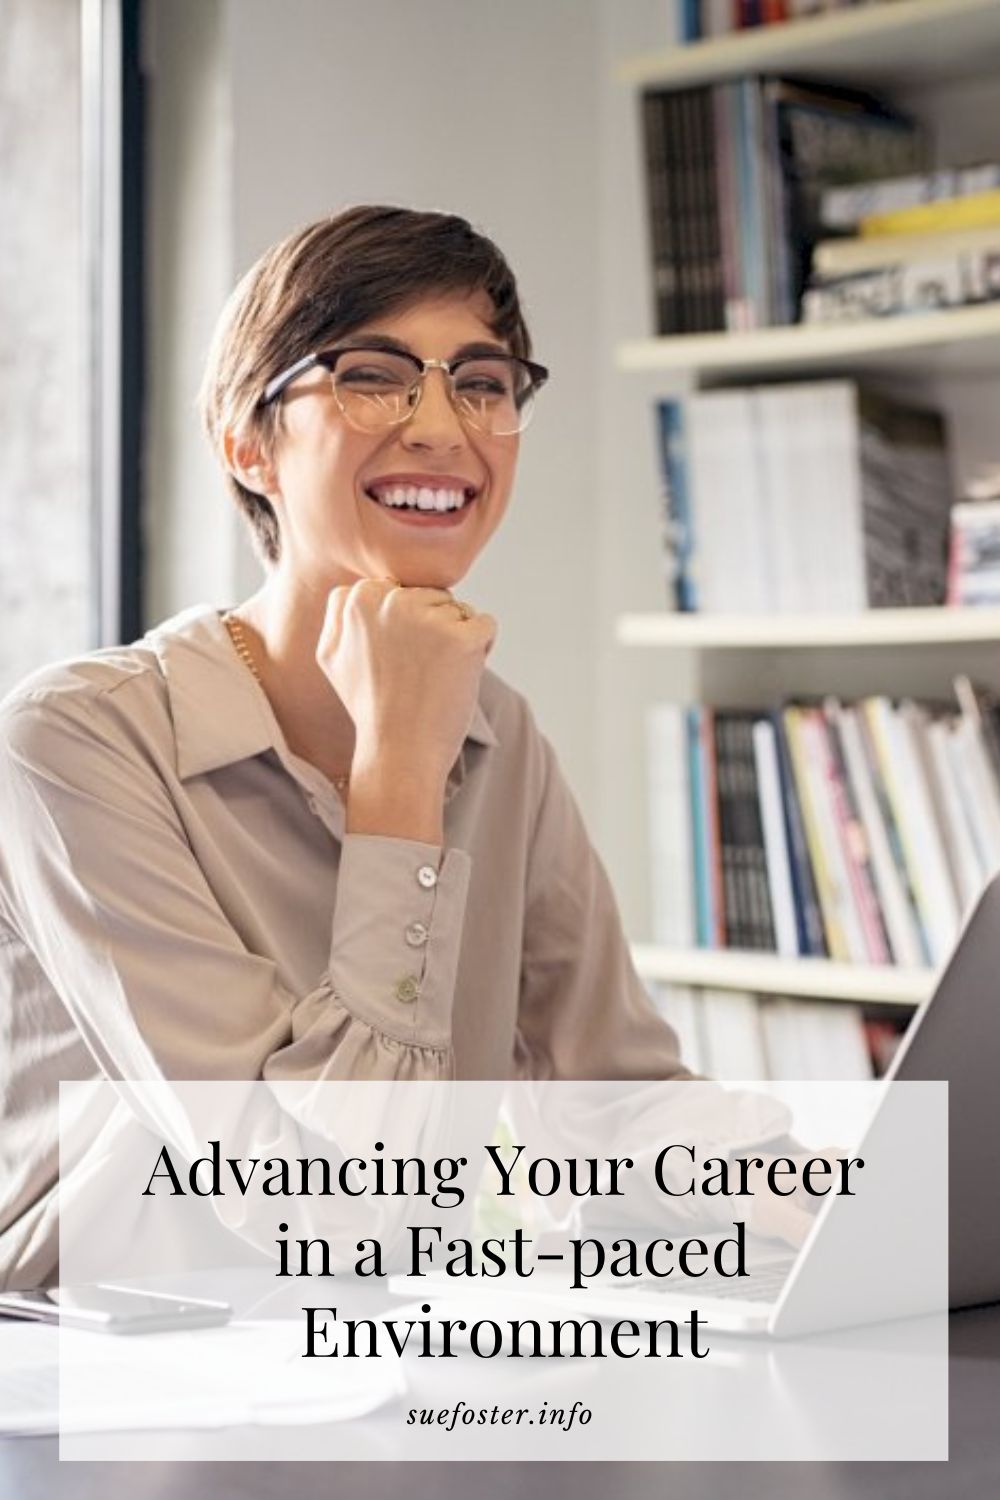 Are you working hard in a fast-paced environment, but you do not see a career advancement? Here's what you need to know.